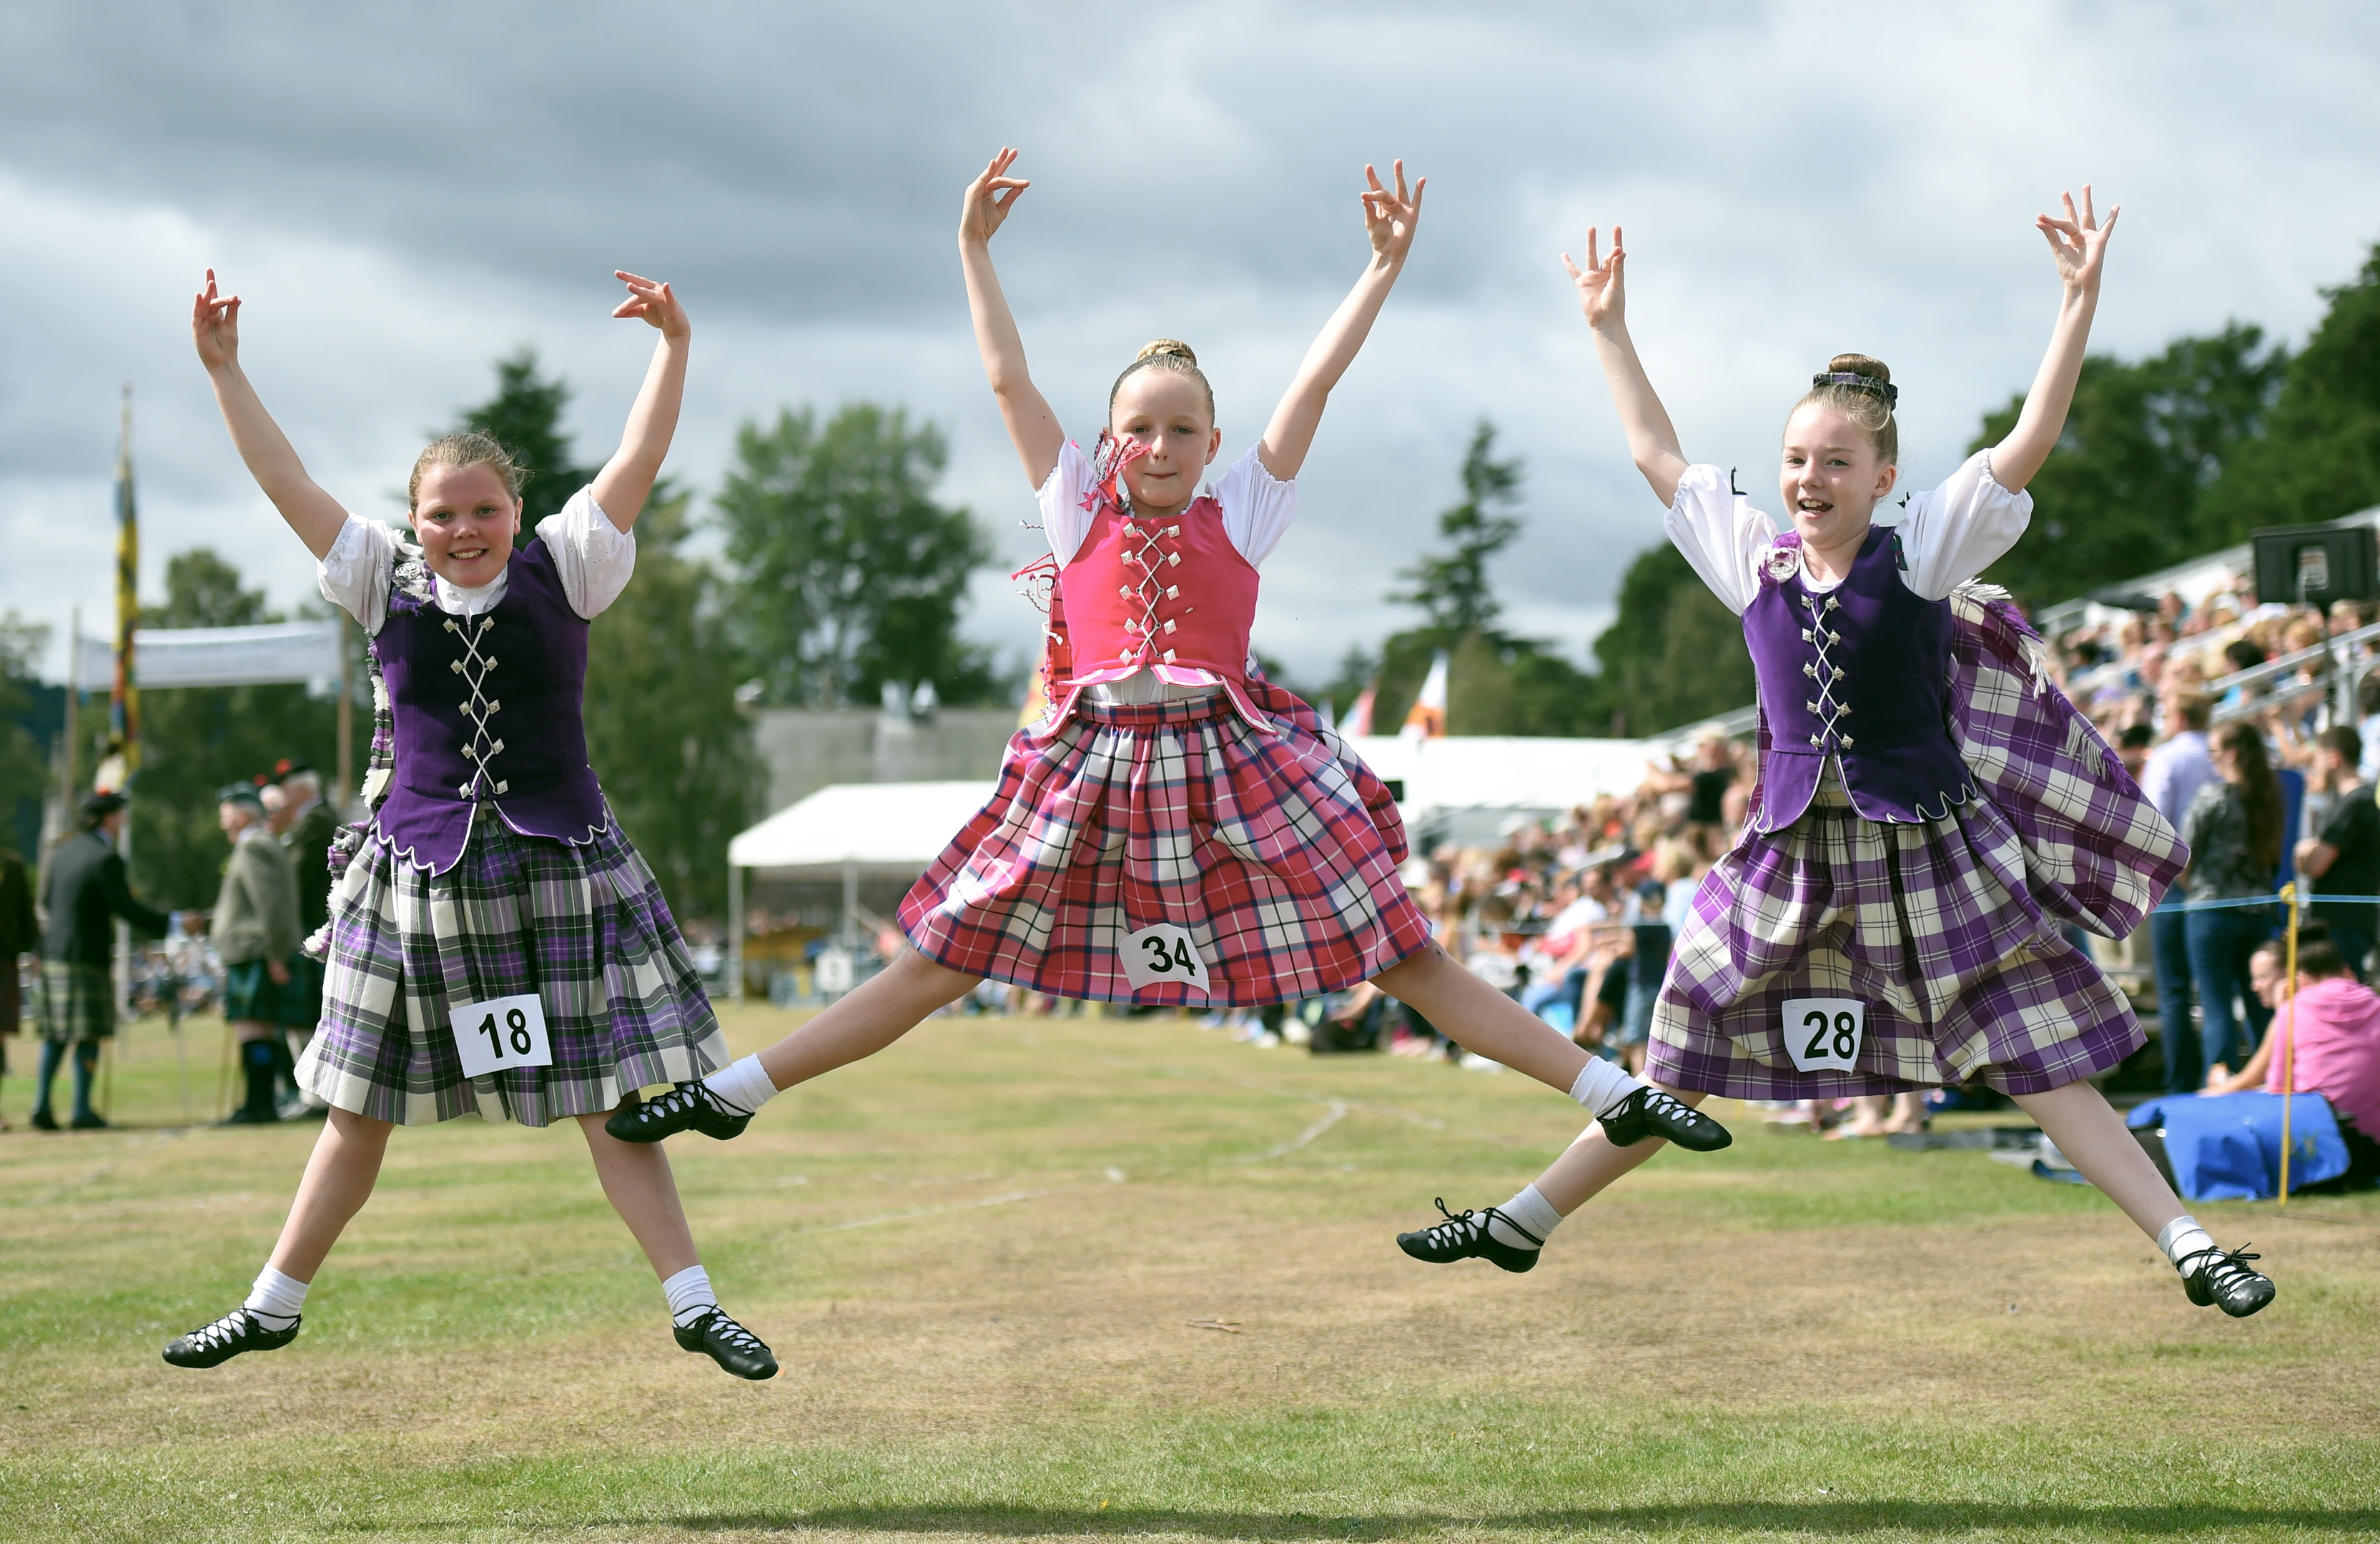 Organisers of Aboyne Highland Games have donated £2,000 to four community groups